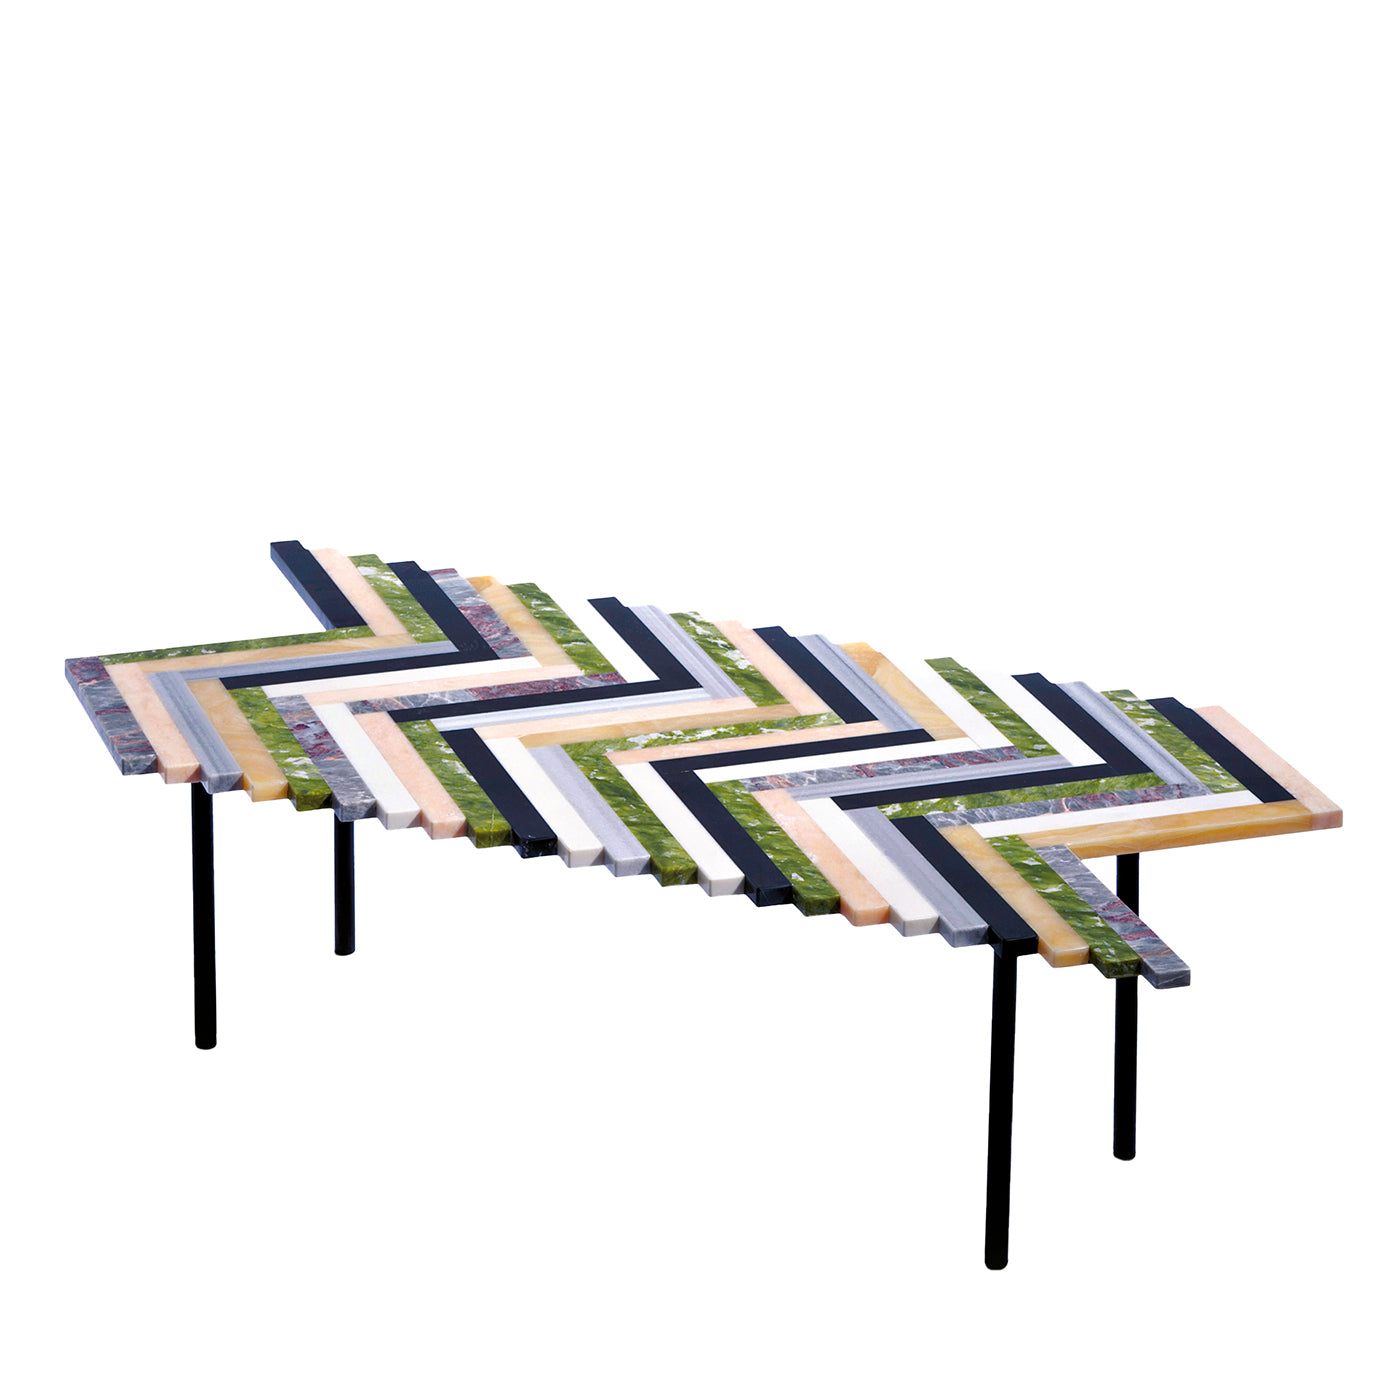 ZigZag Coffee Table L by Patricia Urquiola - Main view